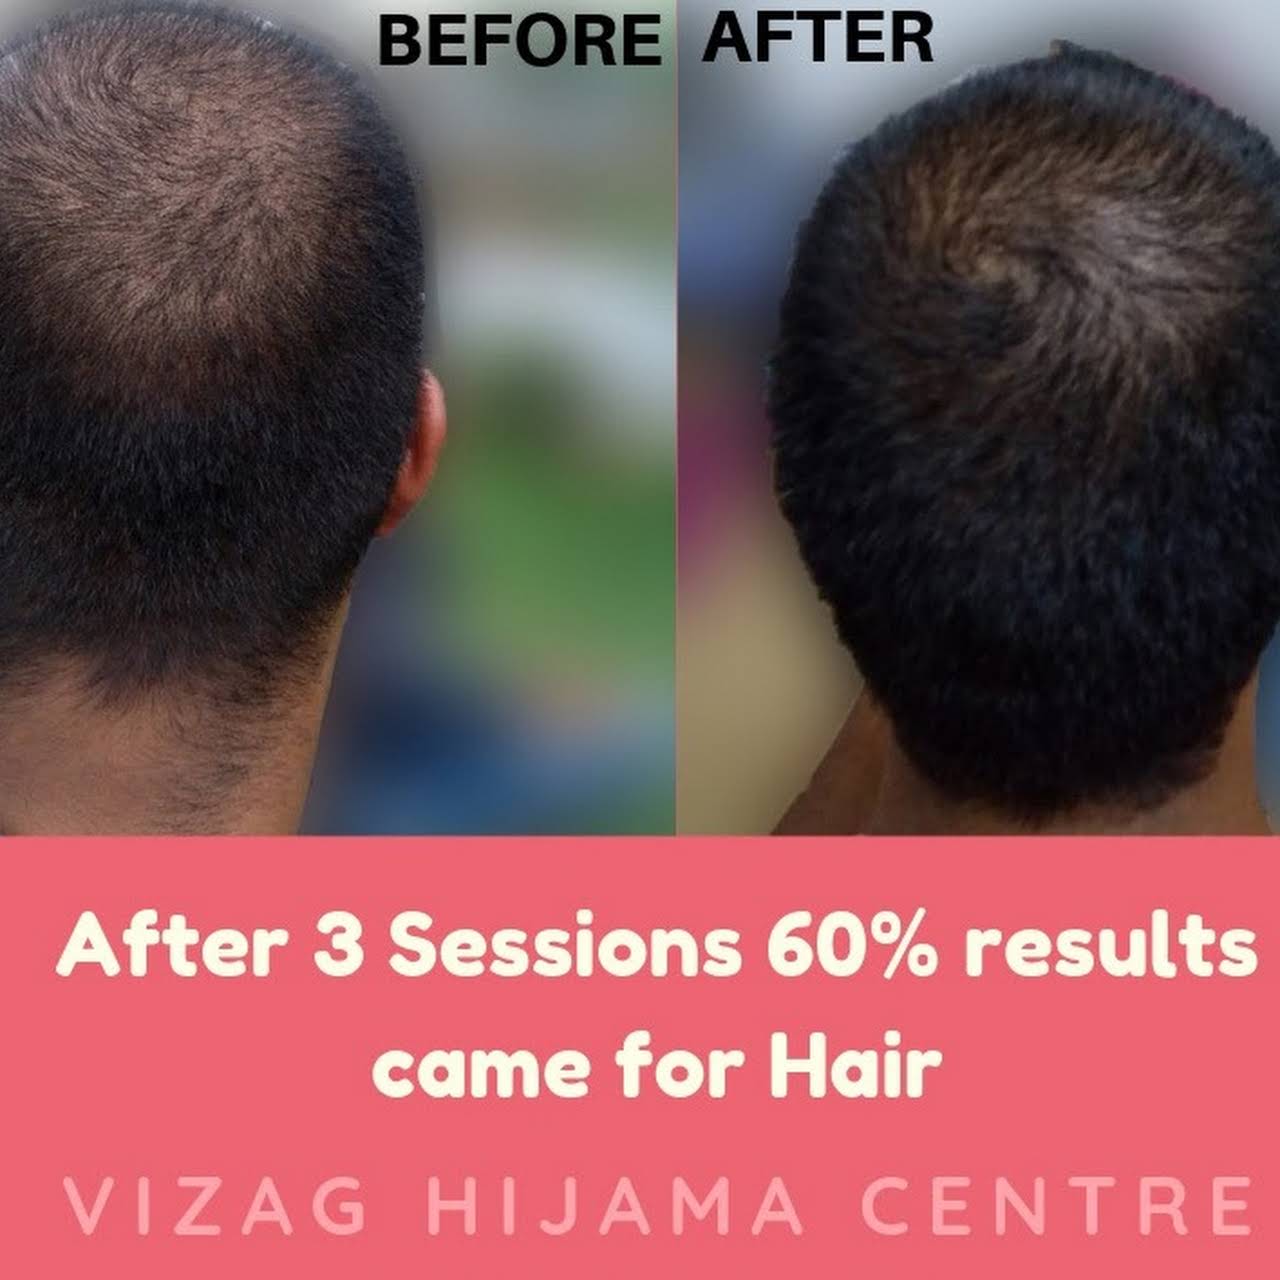 Vizag Hijama Centre (Cupping , Acupressure , Electro Acupuncture , ‚Leech  ,Sujok ‚Moxibustion & IASTM therapy)